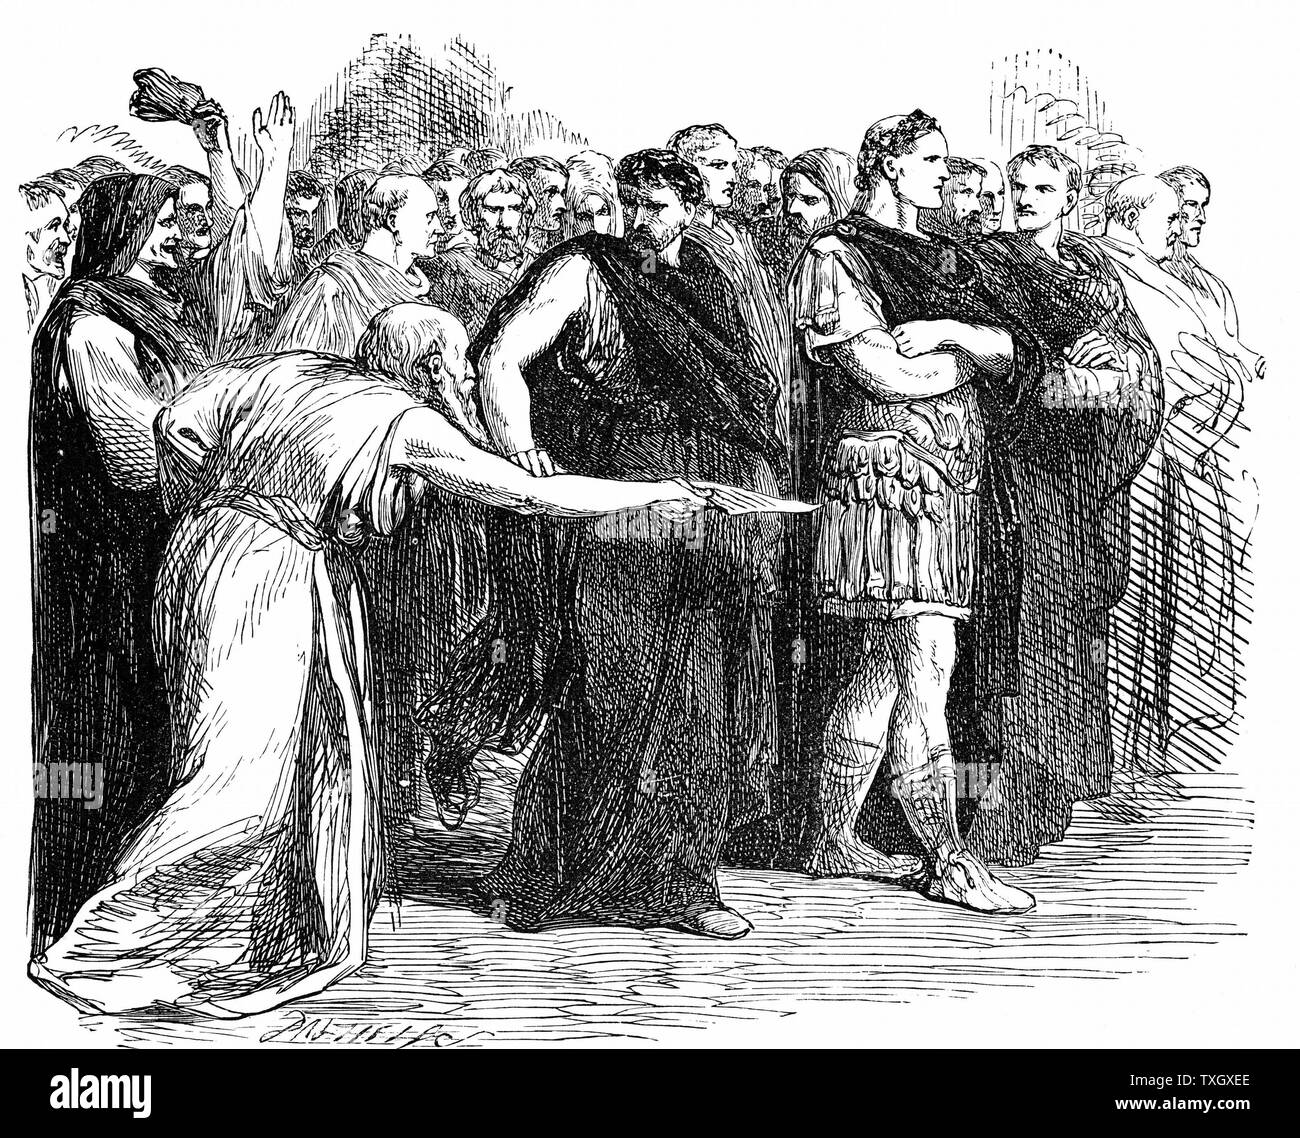 Beware the Ides of March Soothsayer warning Julius Caesar of the Ides of March - the day on which he was assassinated.  Illustration for 'Julius Caesar' from an edition of Shakespeare's works 1858 Wood engraving Stock Photo